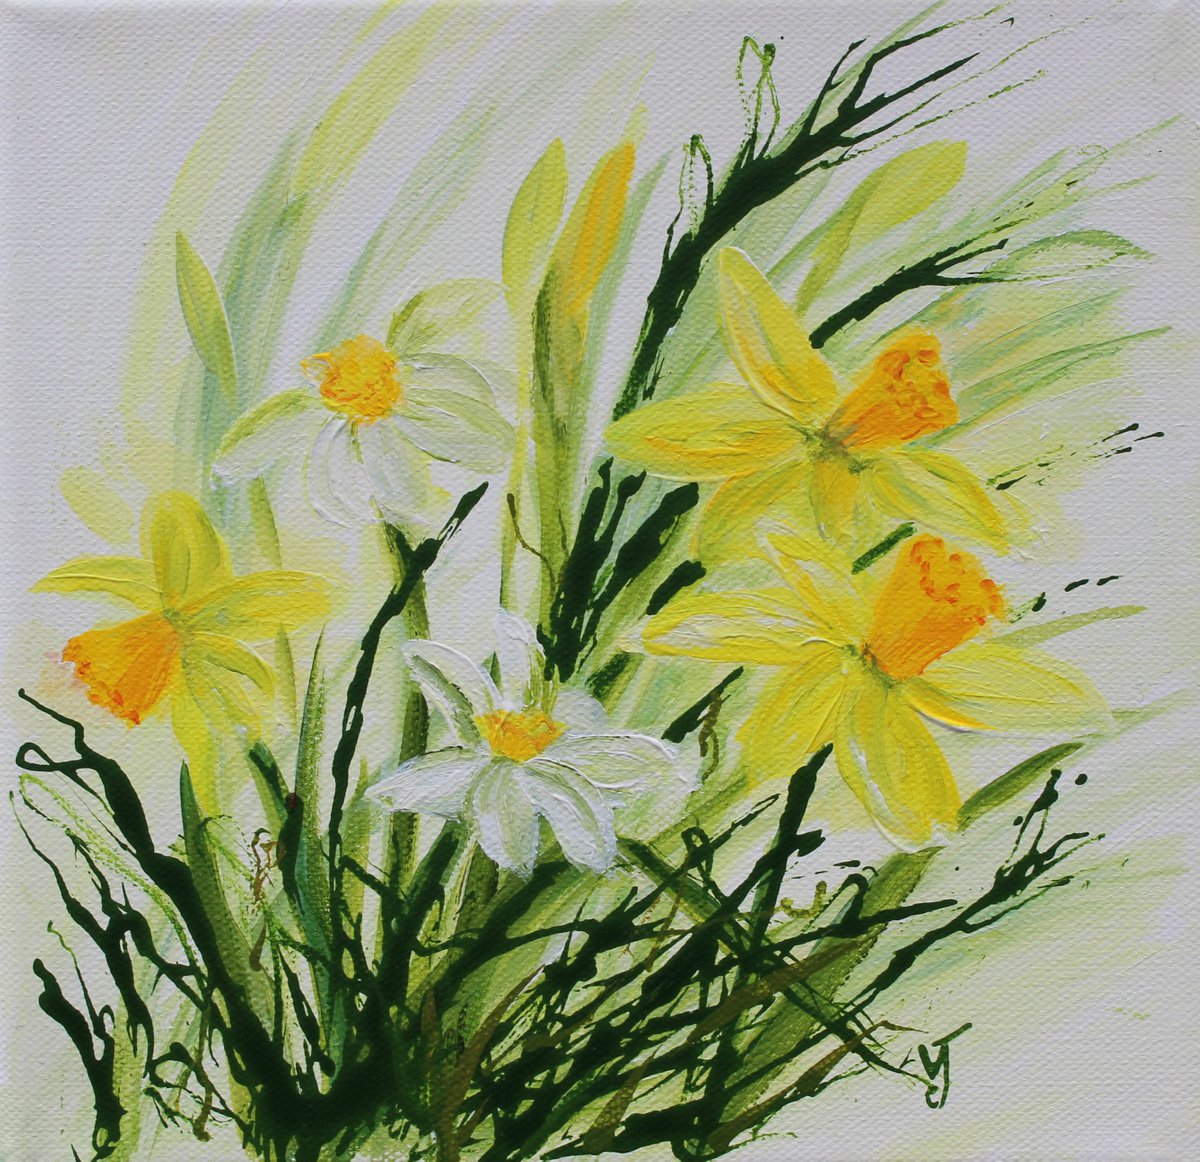 Daffodils by Valerie Jobes